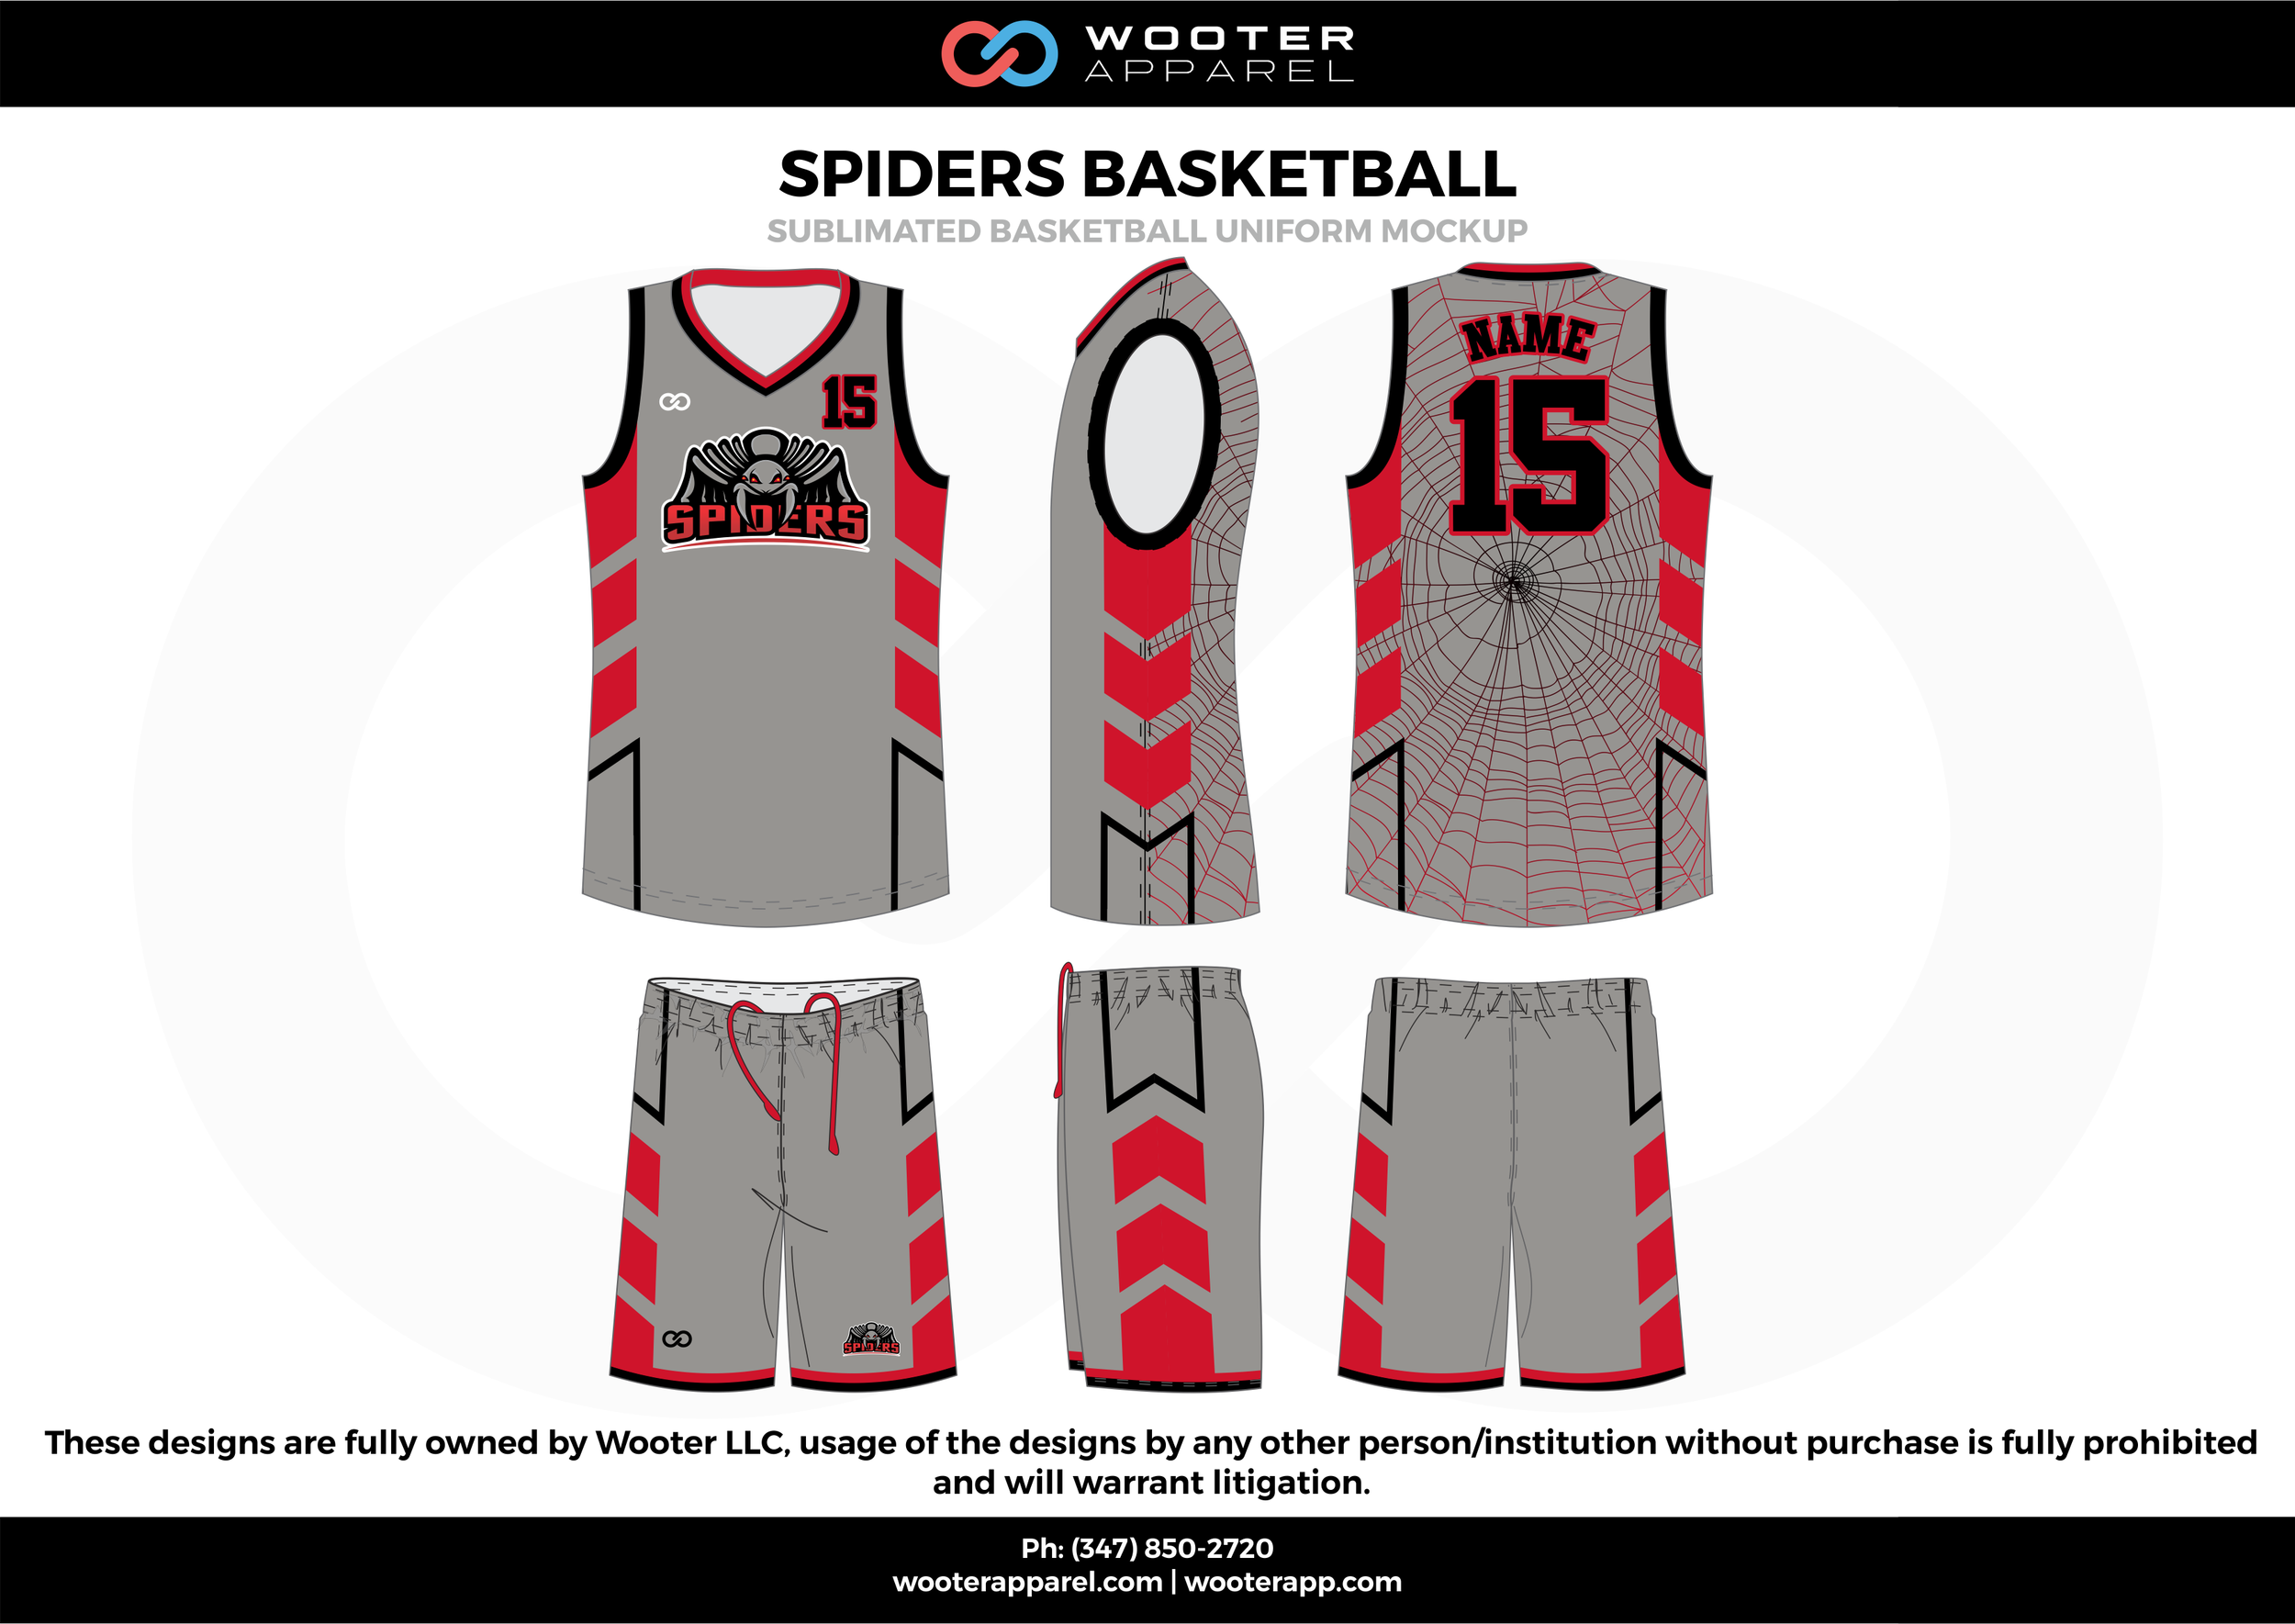 gray color basketball jersey